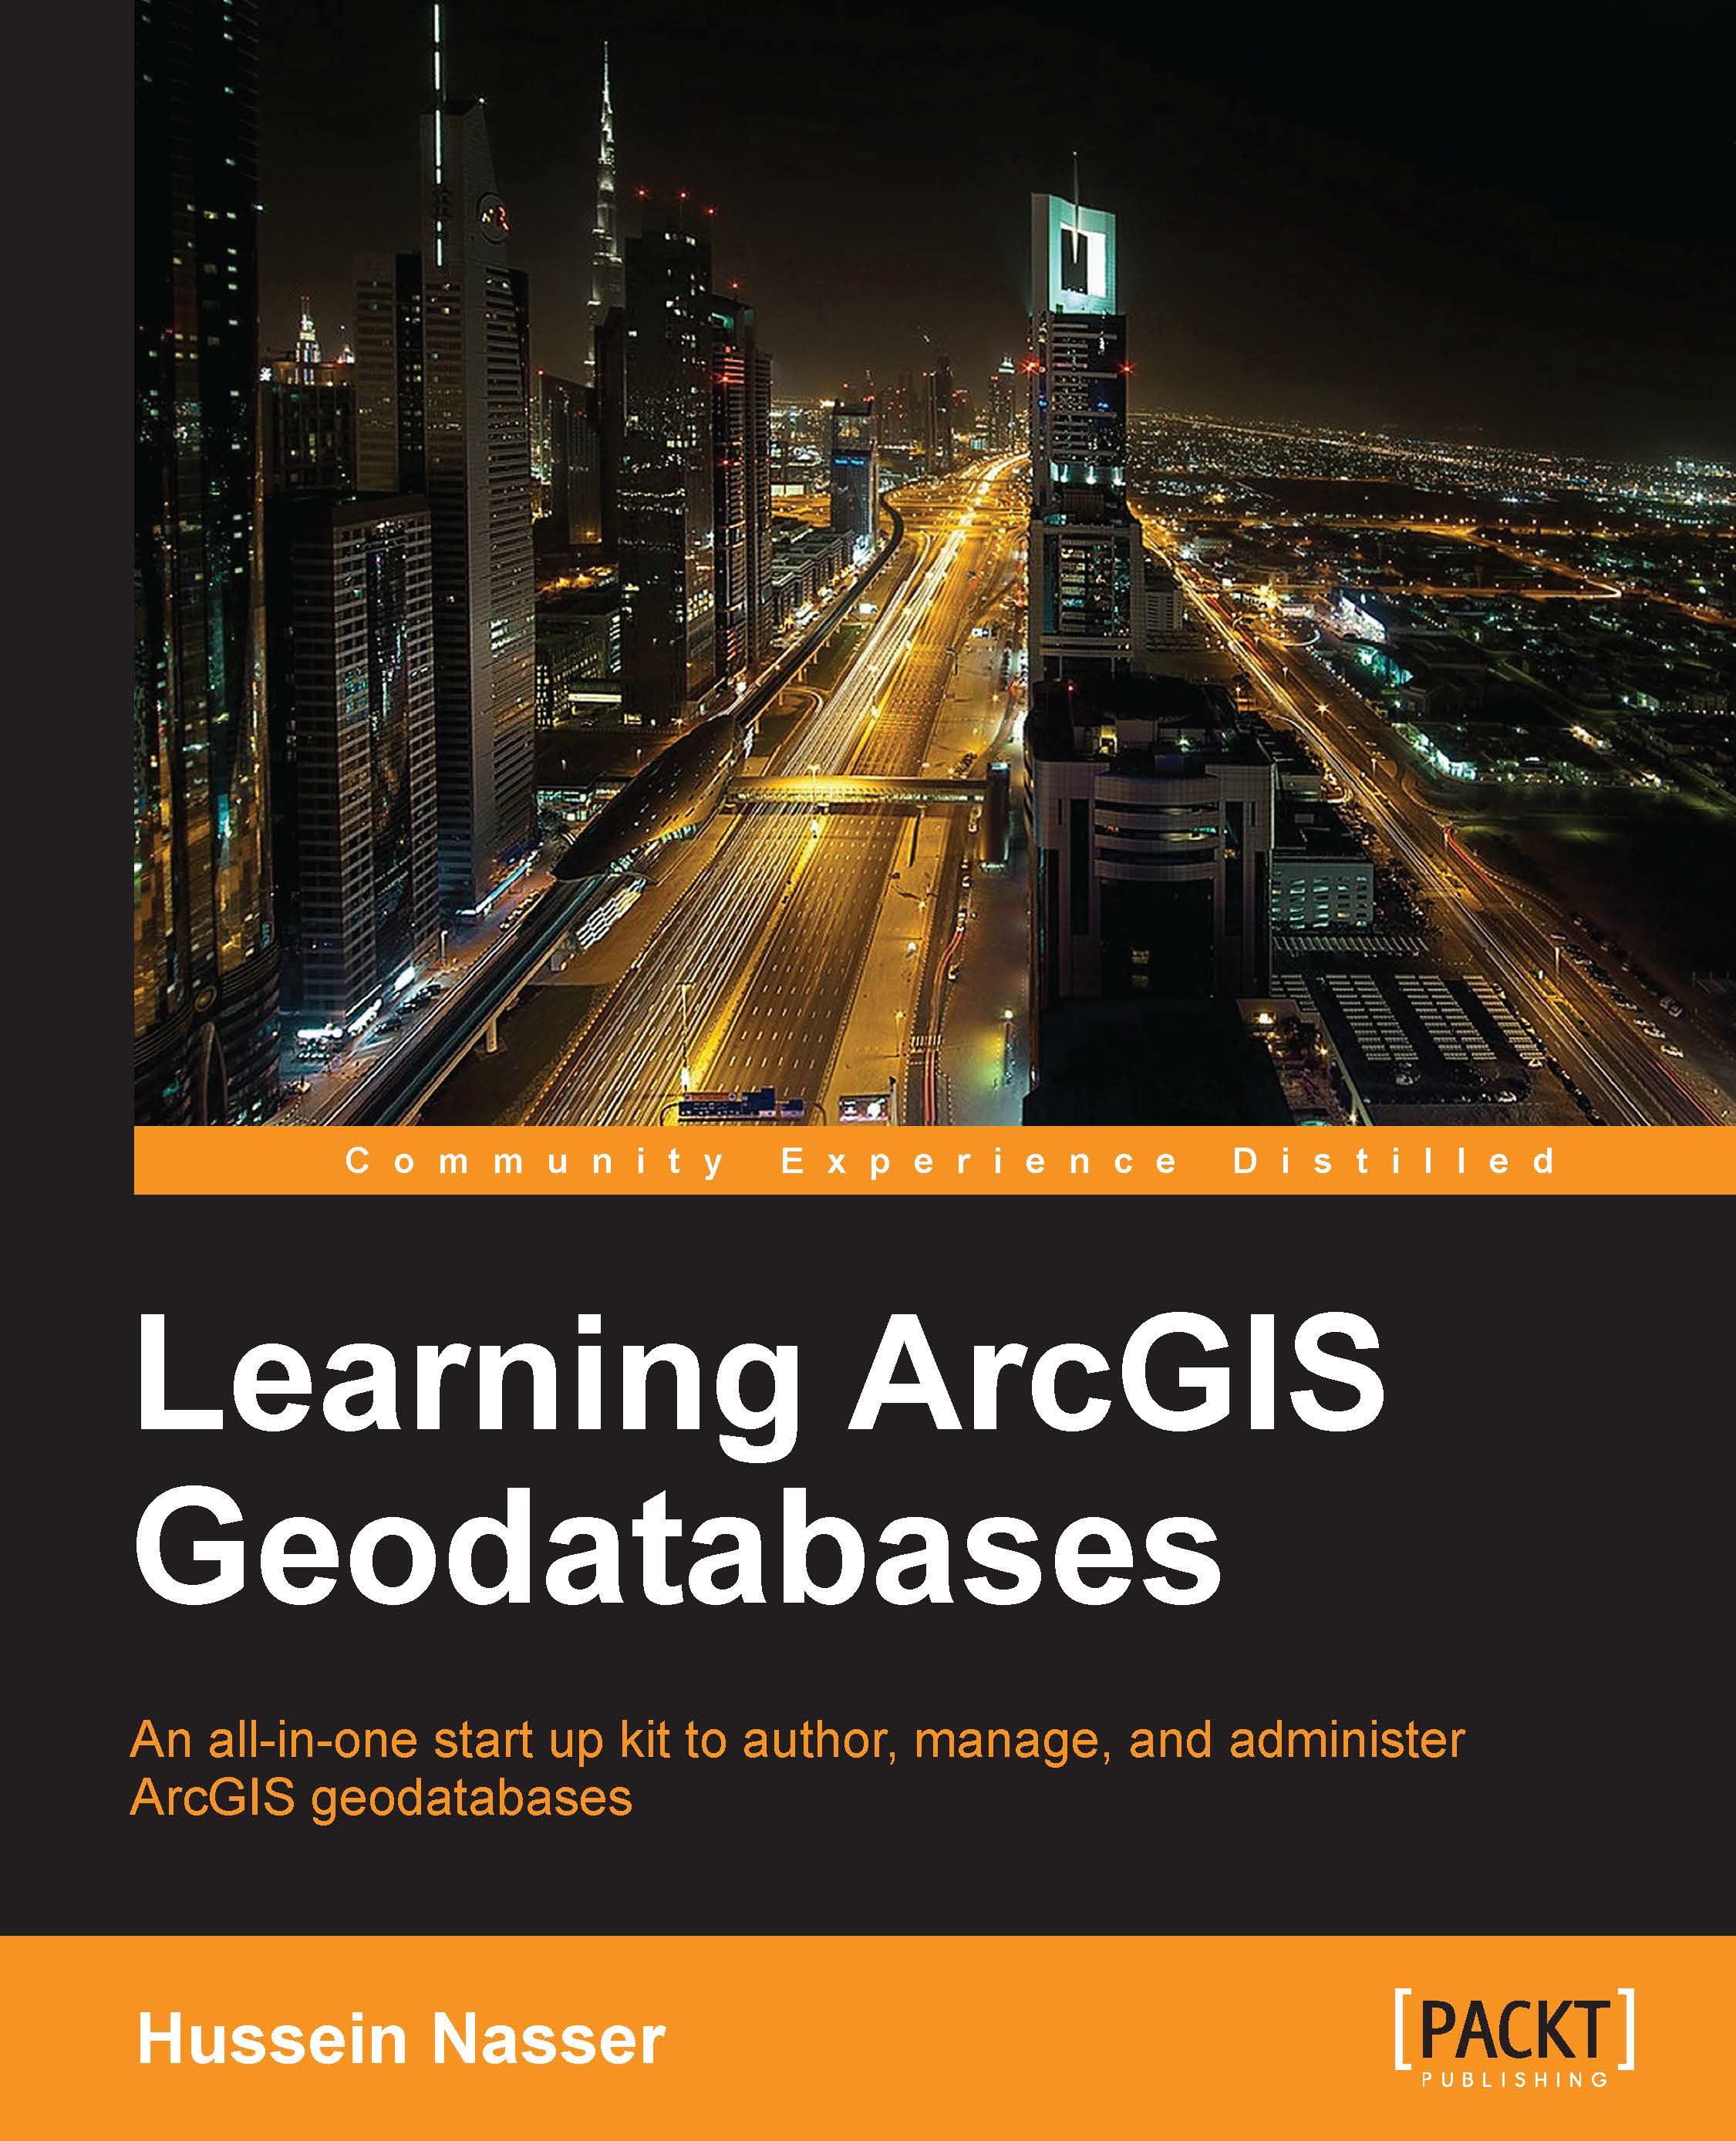 Learning ArcGIS Geodatabases: An all-in-one start up kit to author, manage, and administer ArcGIS geodatabases.